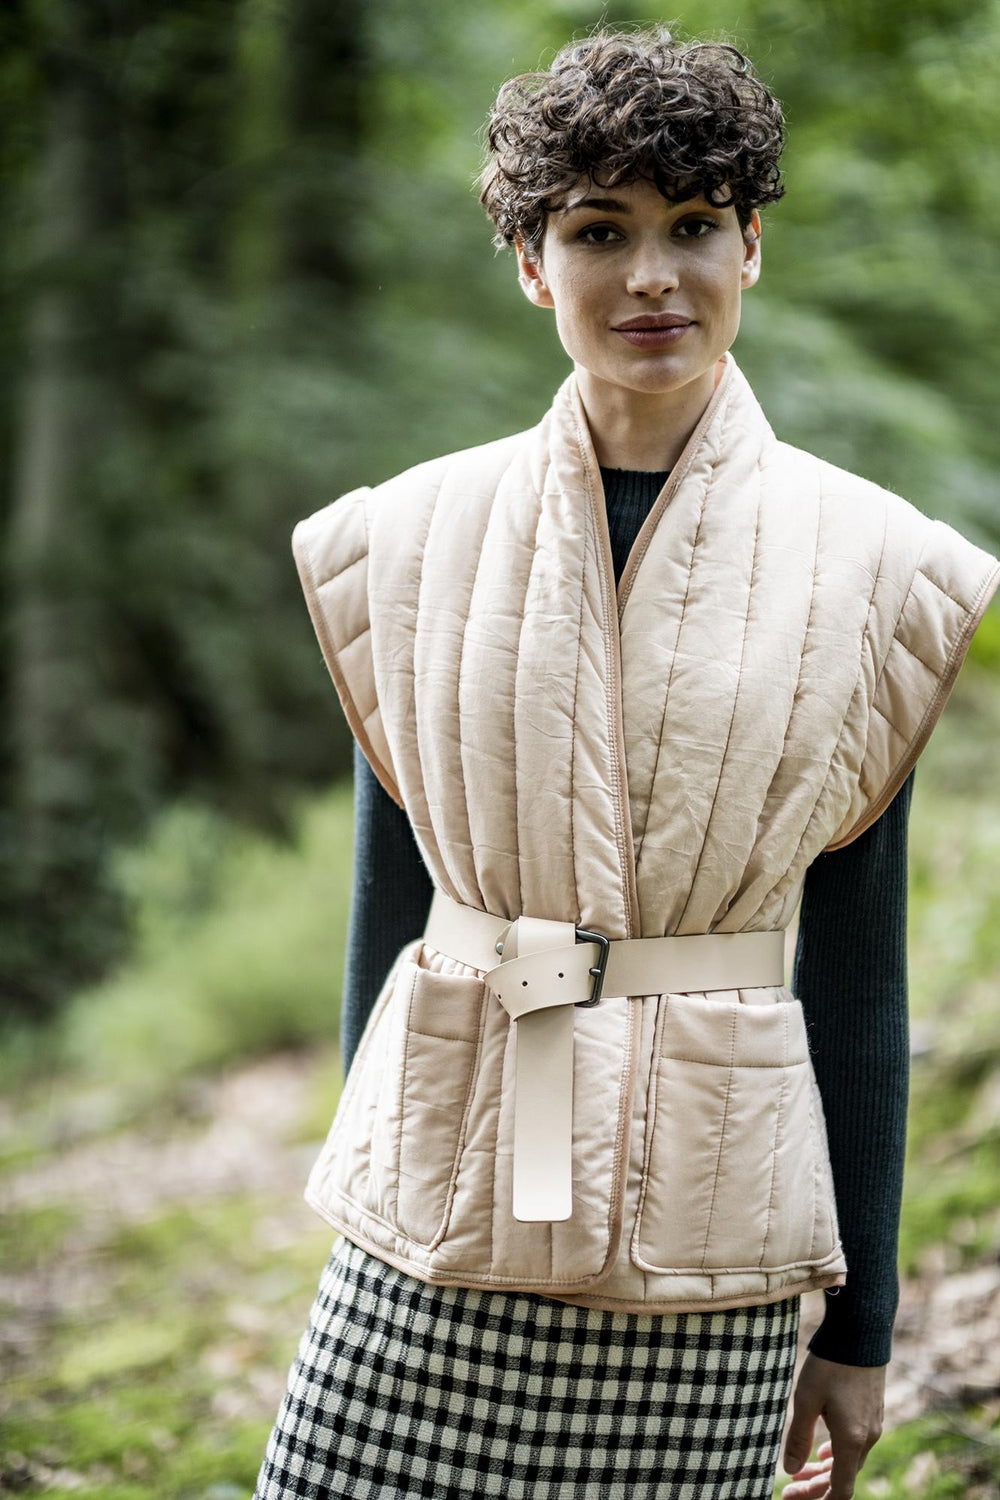 Woman wearing the Irma Bodywarmer sewing pattern from Fibre Mood on The Fold Line. A gilet pattern made in padded, quilted or sweatshirt fabrics, featuring patch pockets, bias tape edging and capped sleeve.